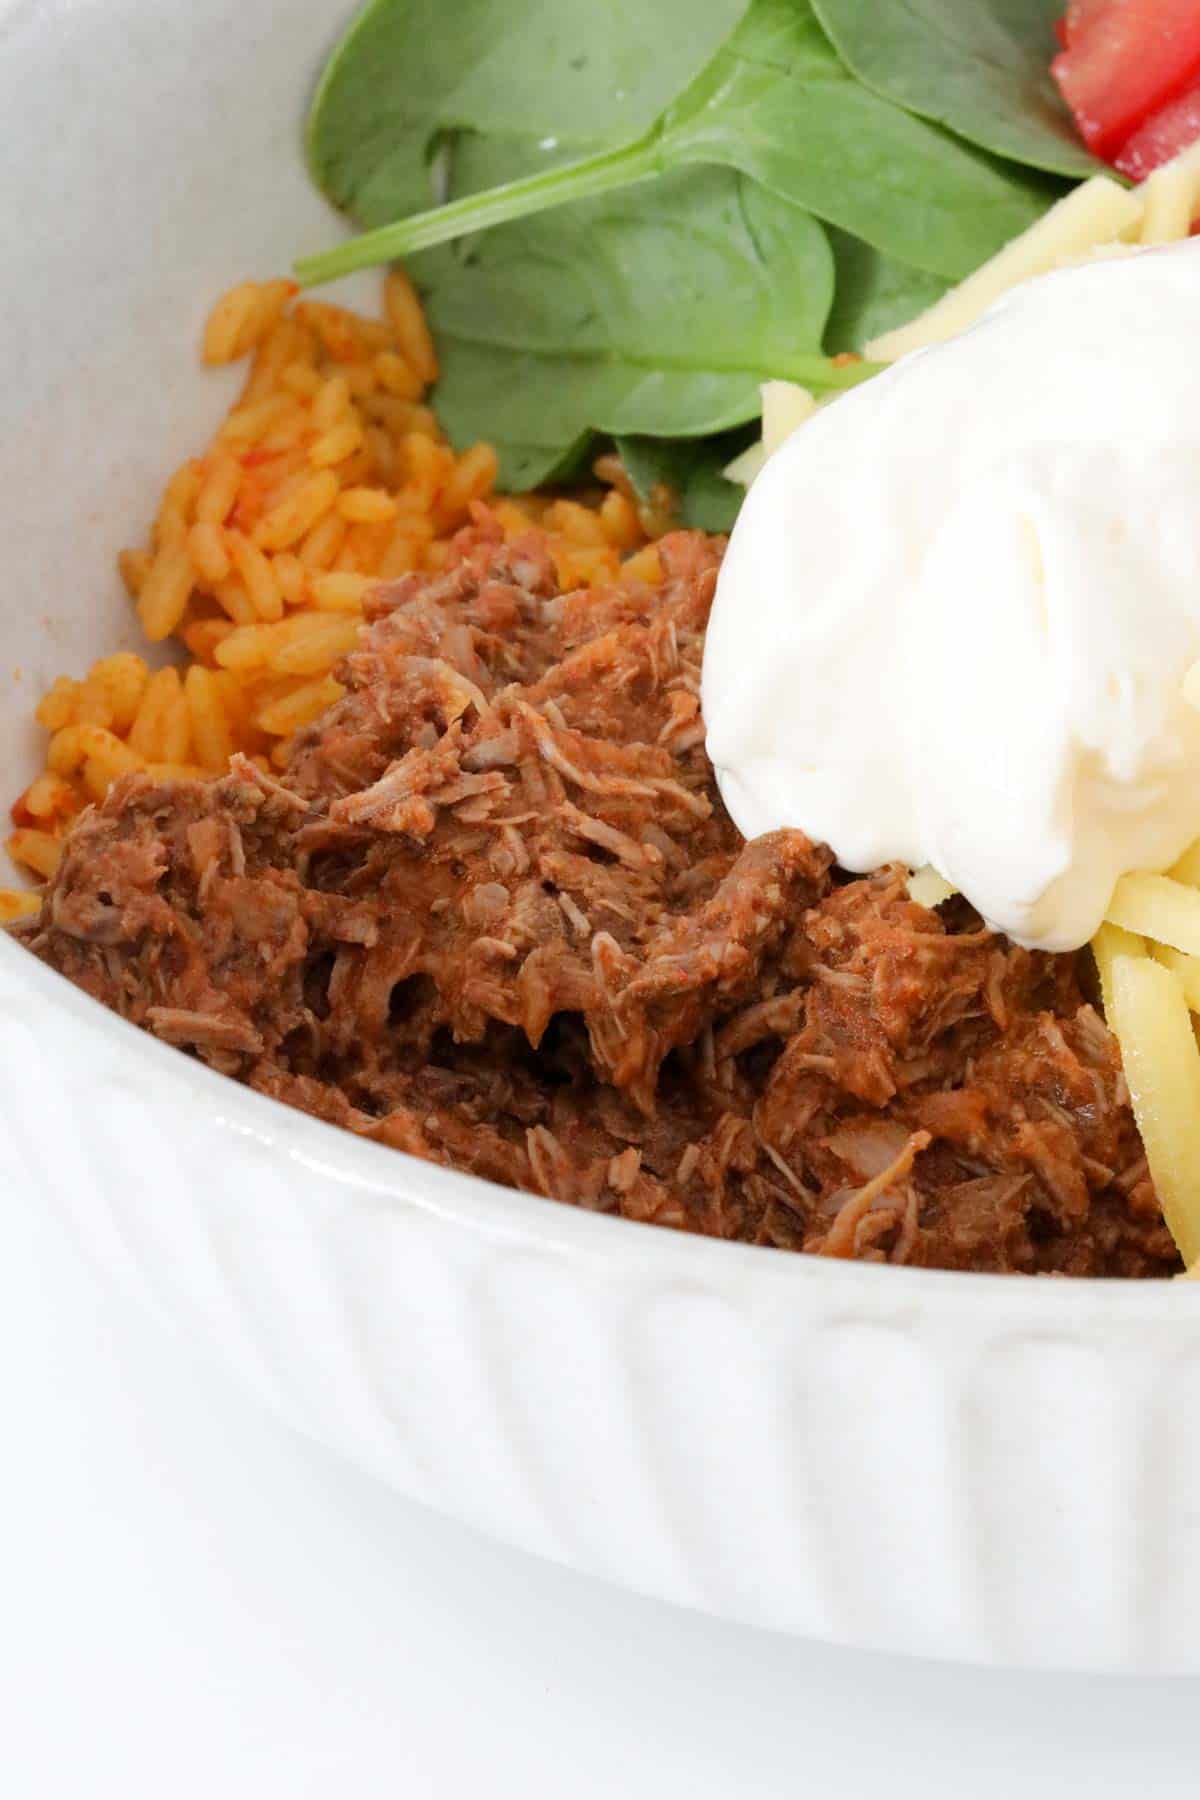 Shredded beef with rice and sour cream.